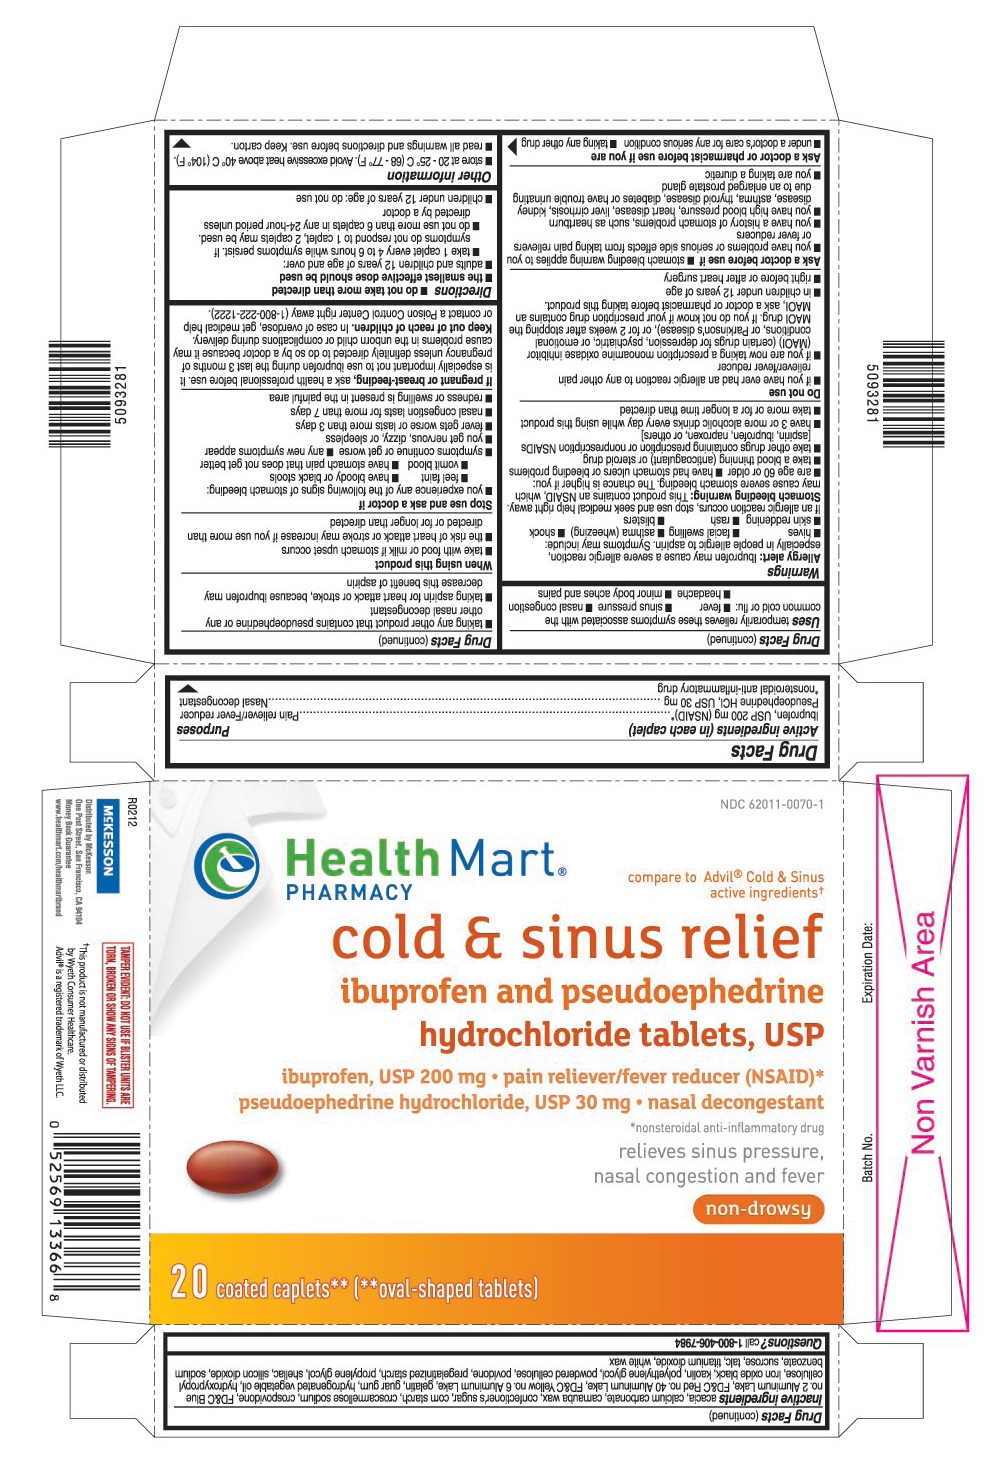 This is the 20 count blister carton label for Health Mart ibuprofen & pseudoephedrine hydrochloride tablets, USP.